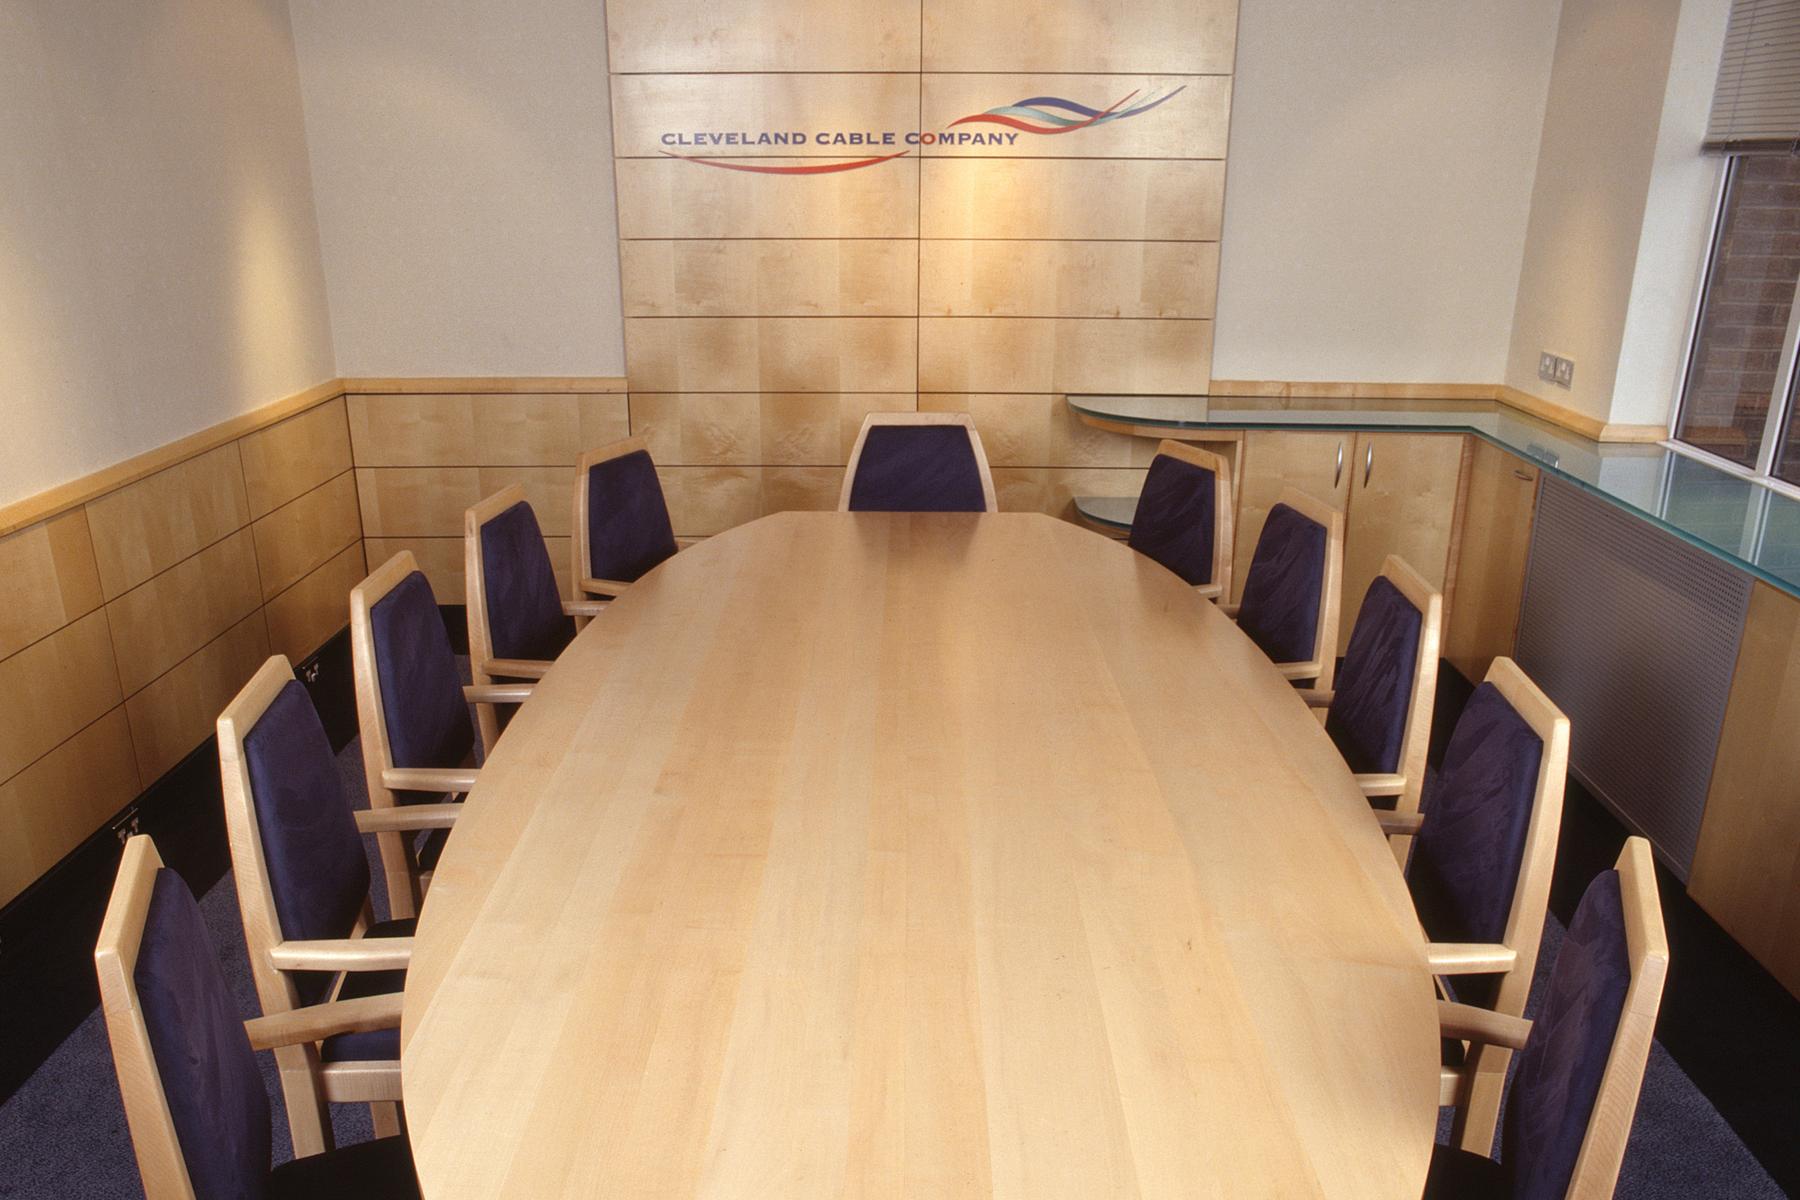 Cleveland Cable Company boardroom